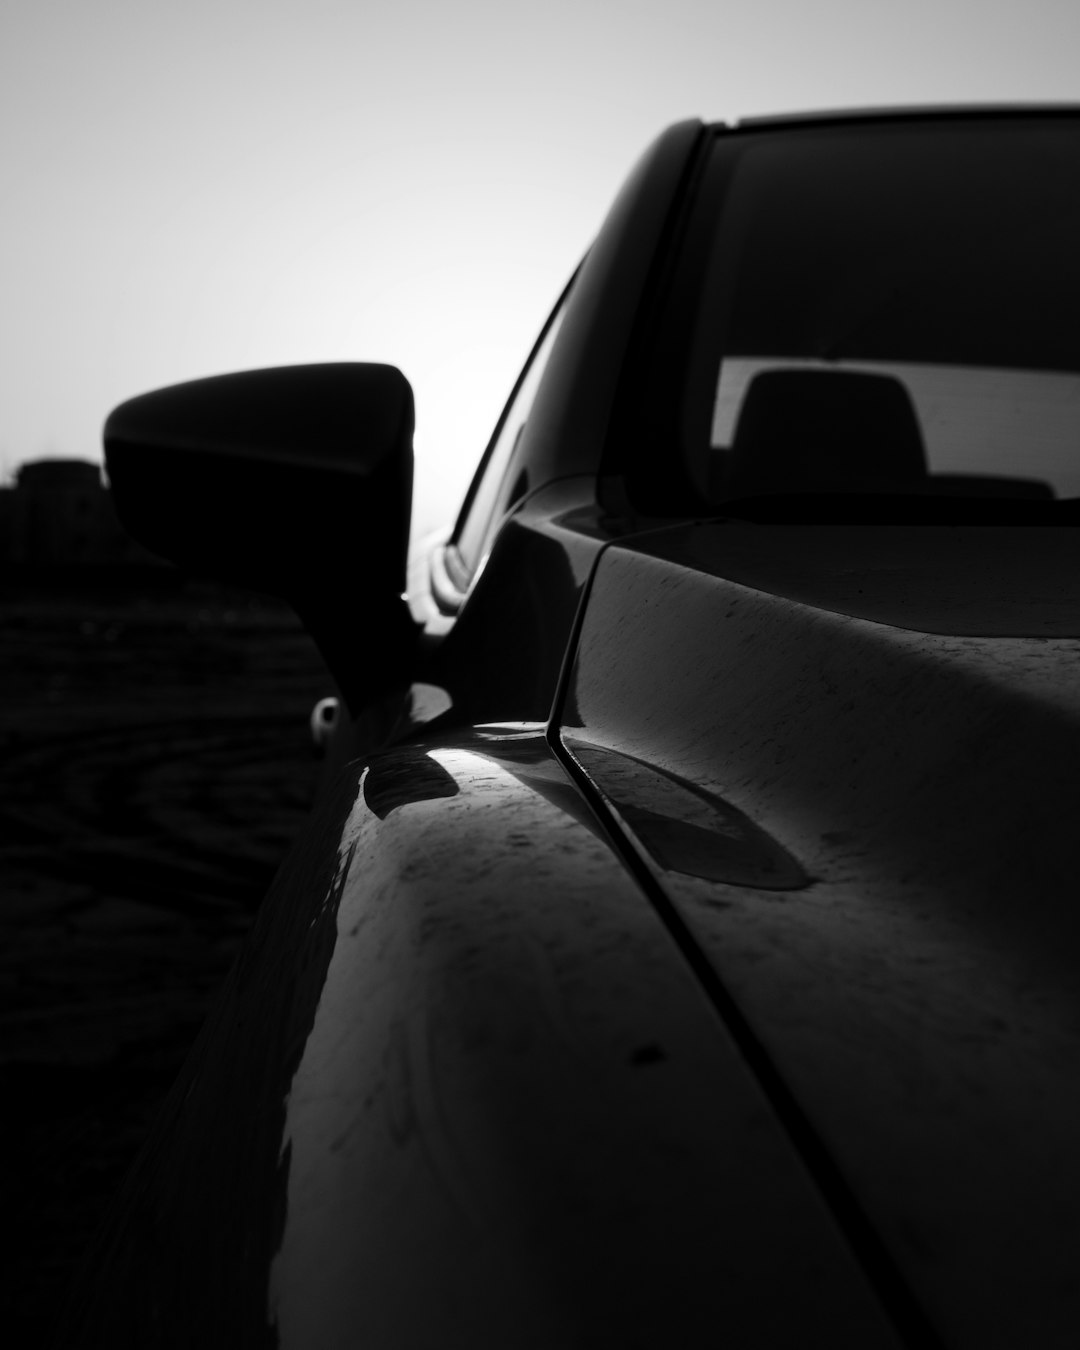 grayscale photo of car on road